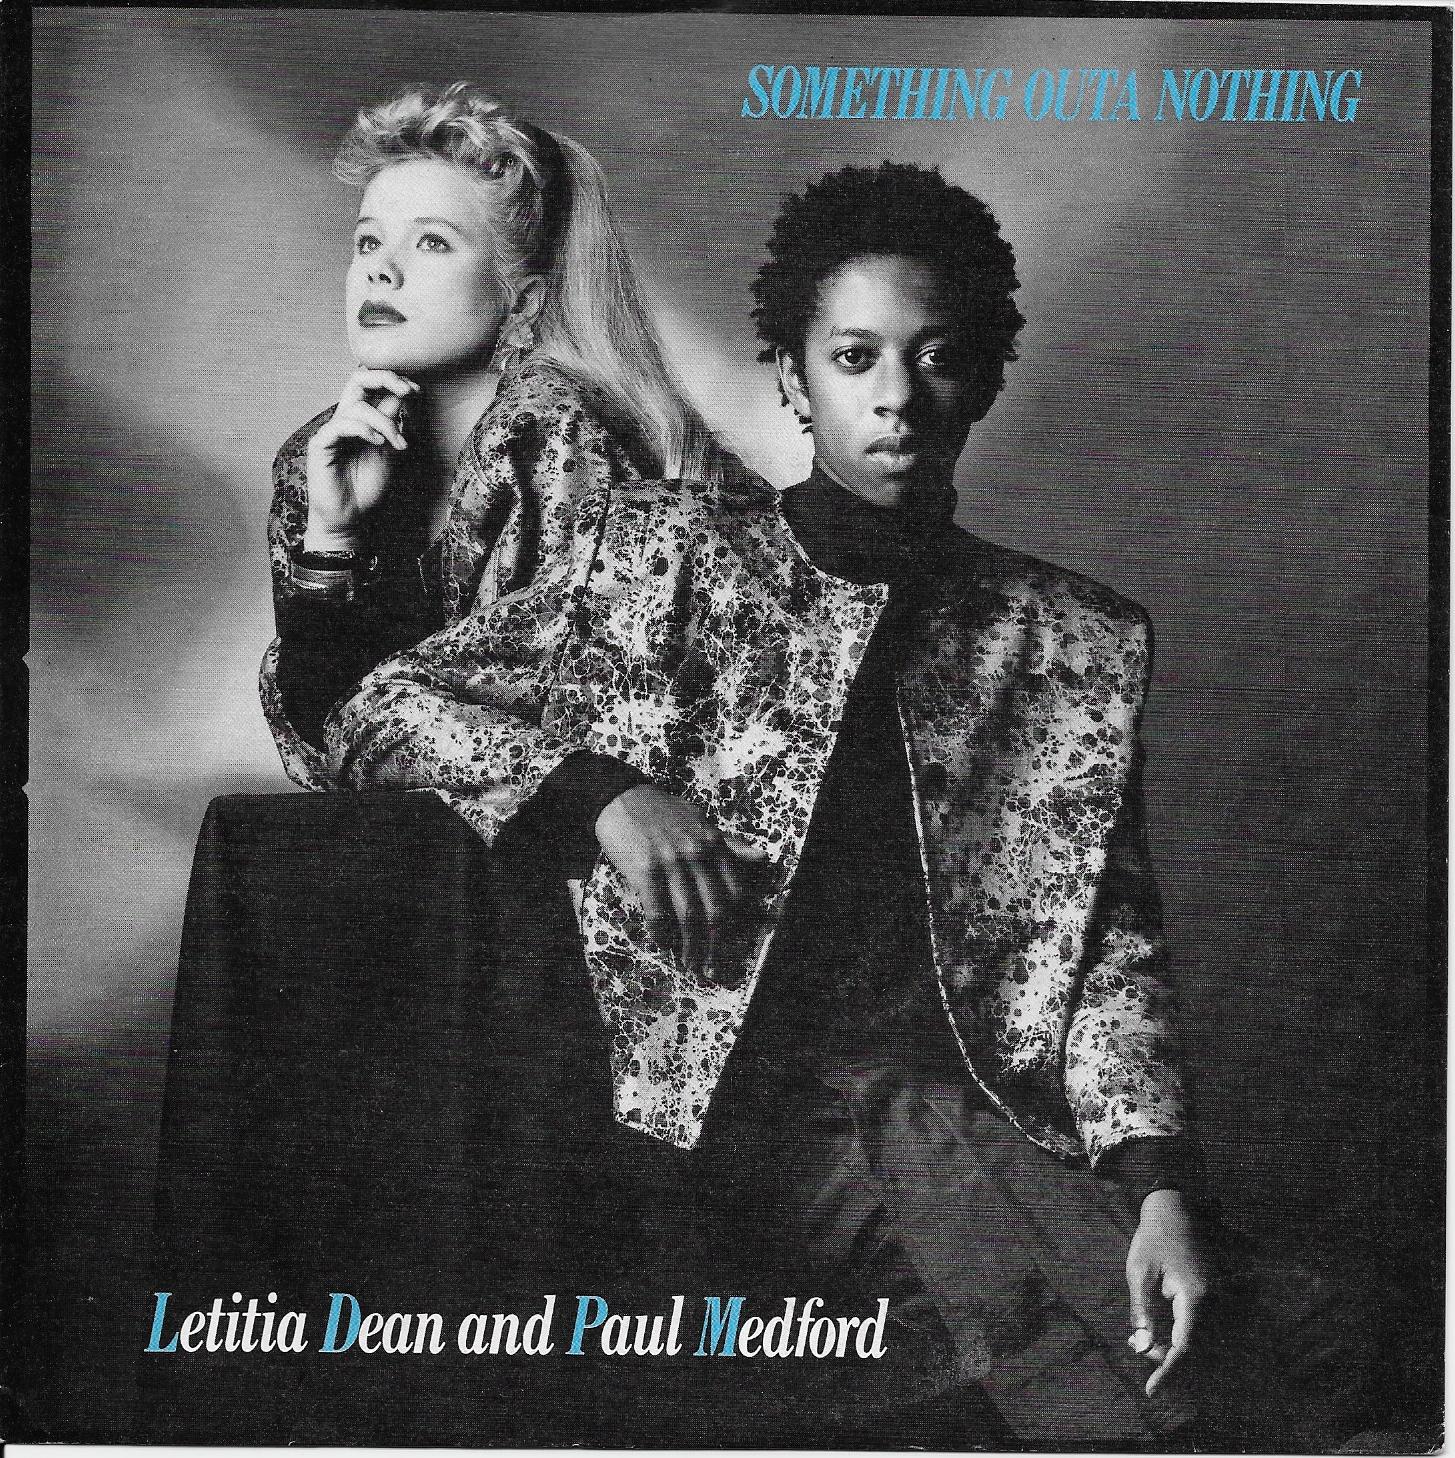 Picture of RESL 203 Something outa nothing (EastEnders) by artist Letitia Dean and Paul Medford from the BBC records and Tapes library